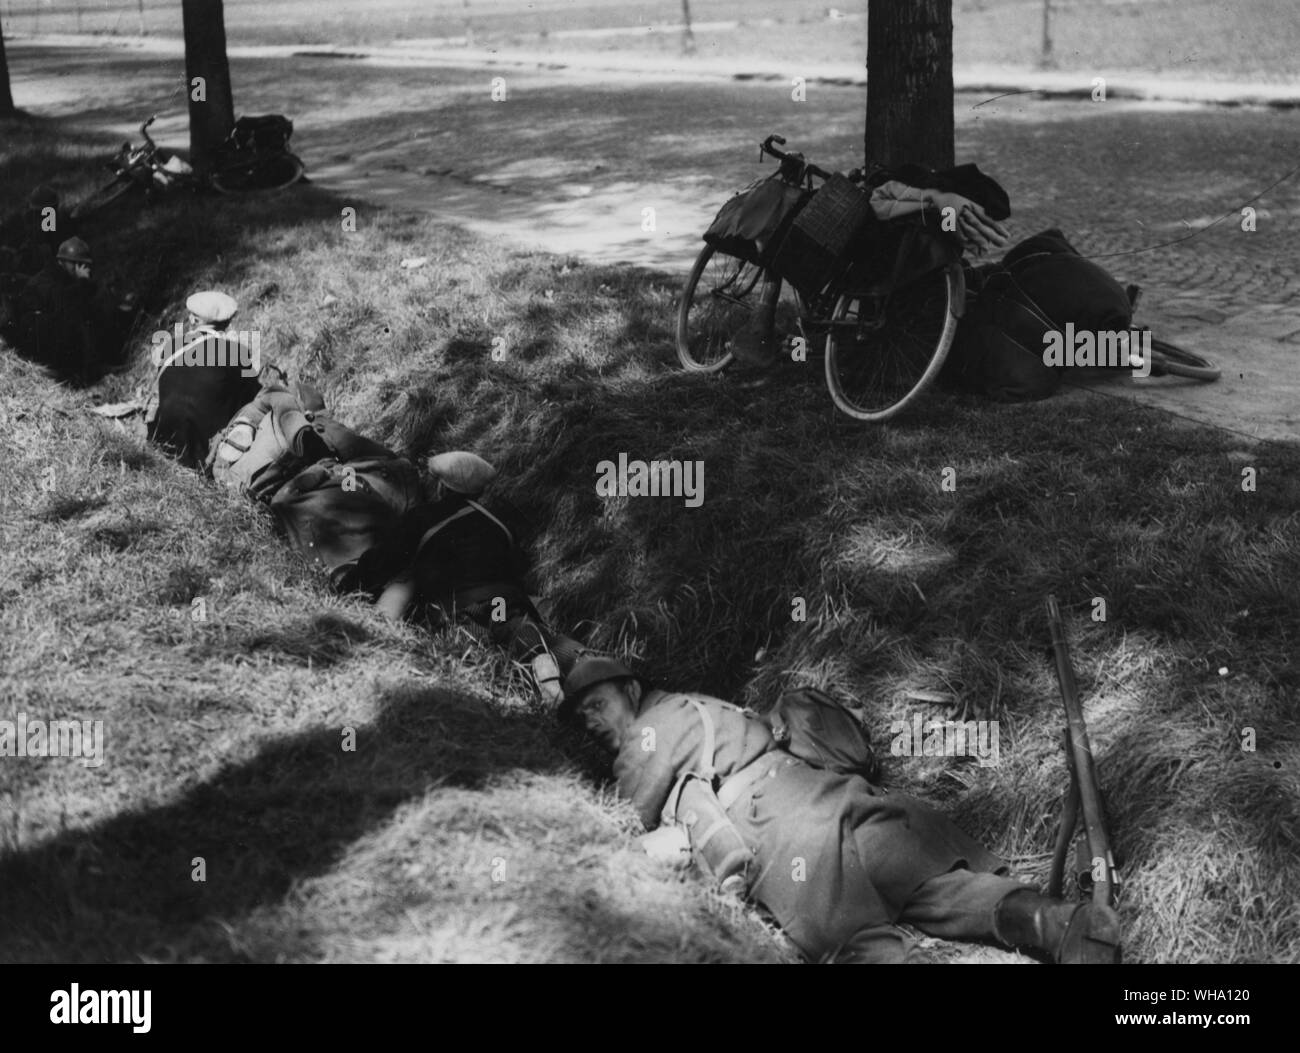 WW2: Belgian soldiers and refugees in a ditch during air attacks on the main road. Stock Photo